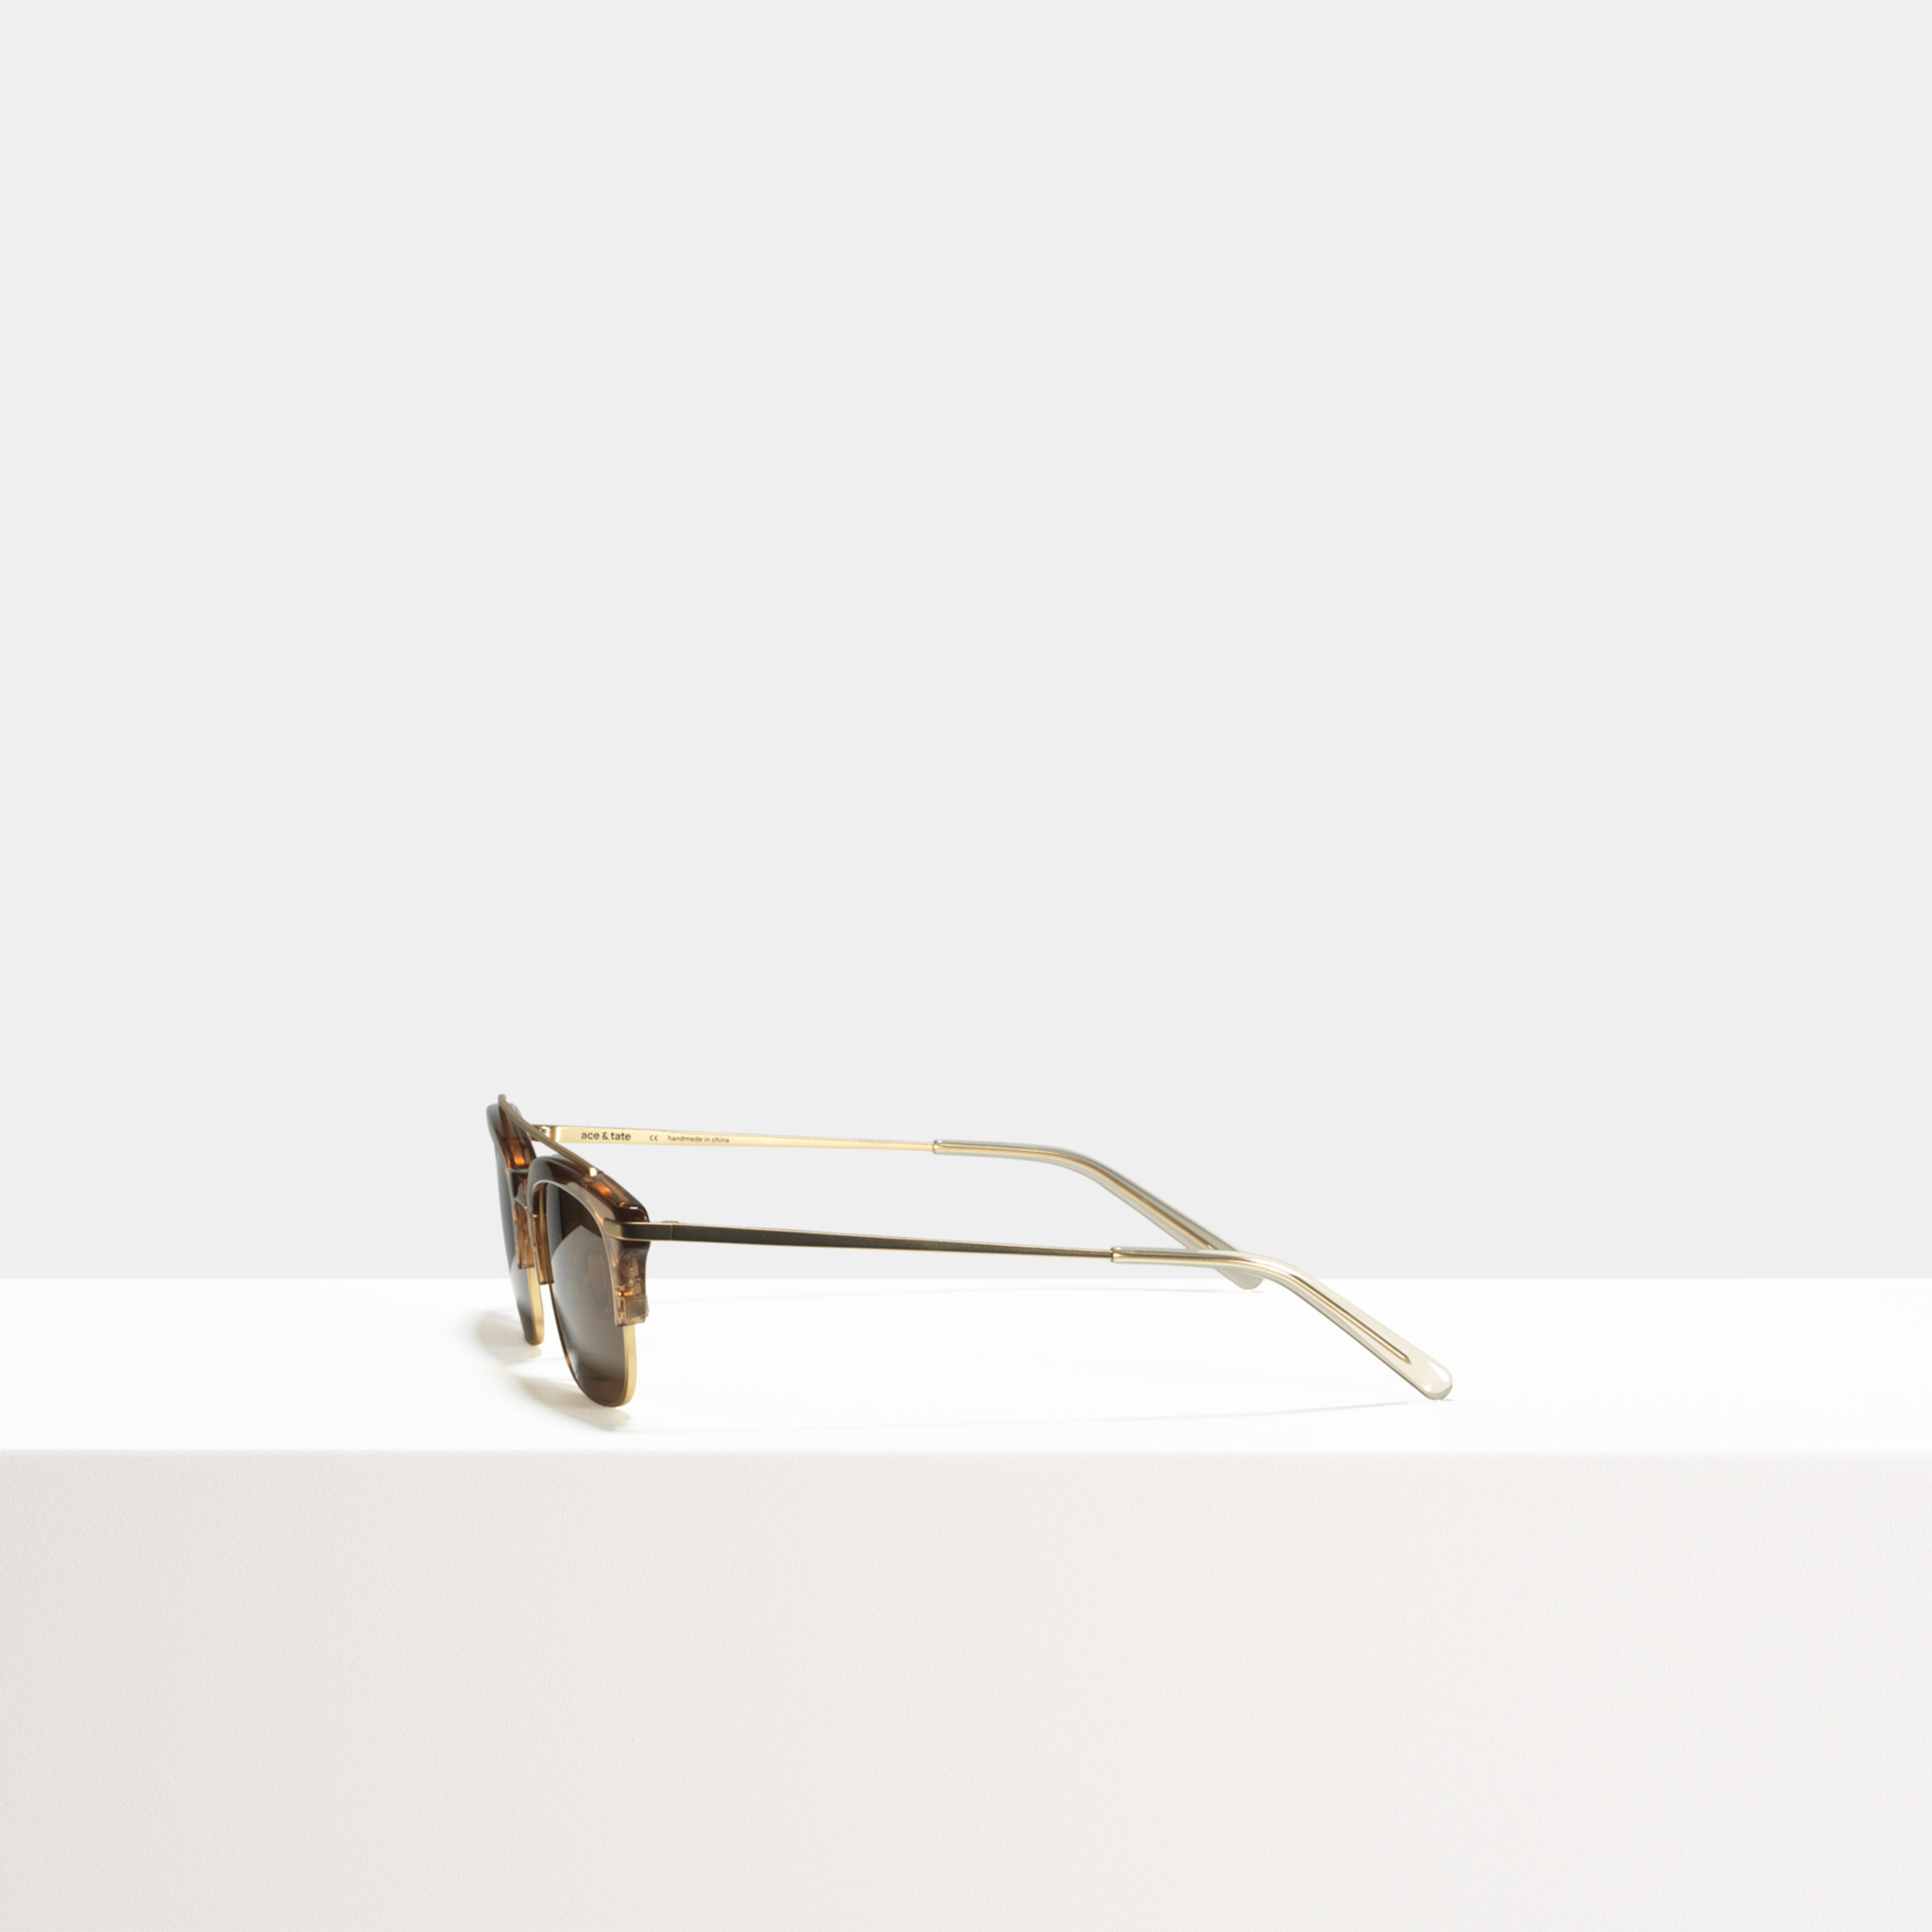 Ace & Tate Sunglasses | rectangle Combi in Brown